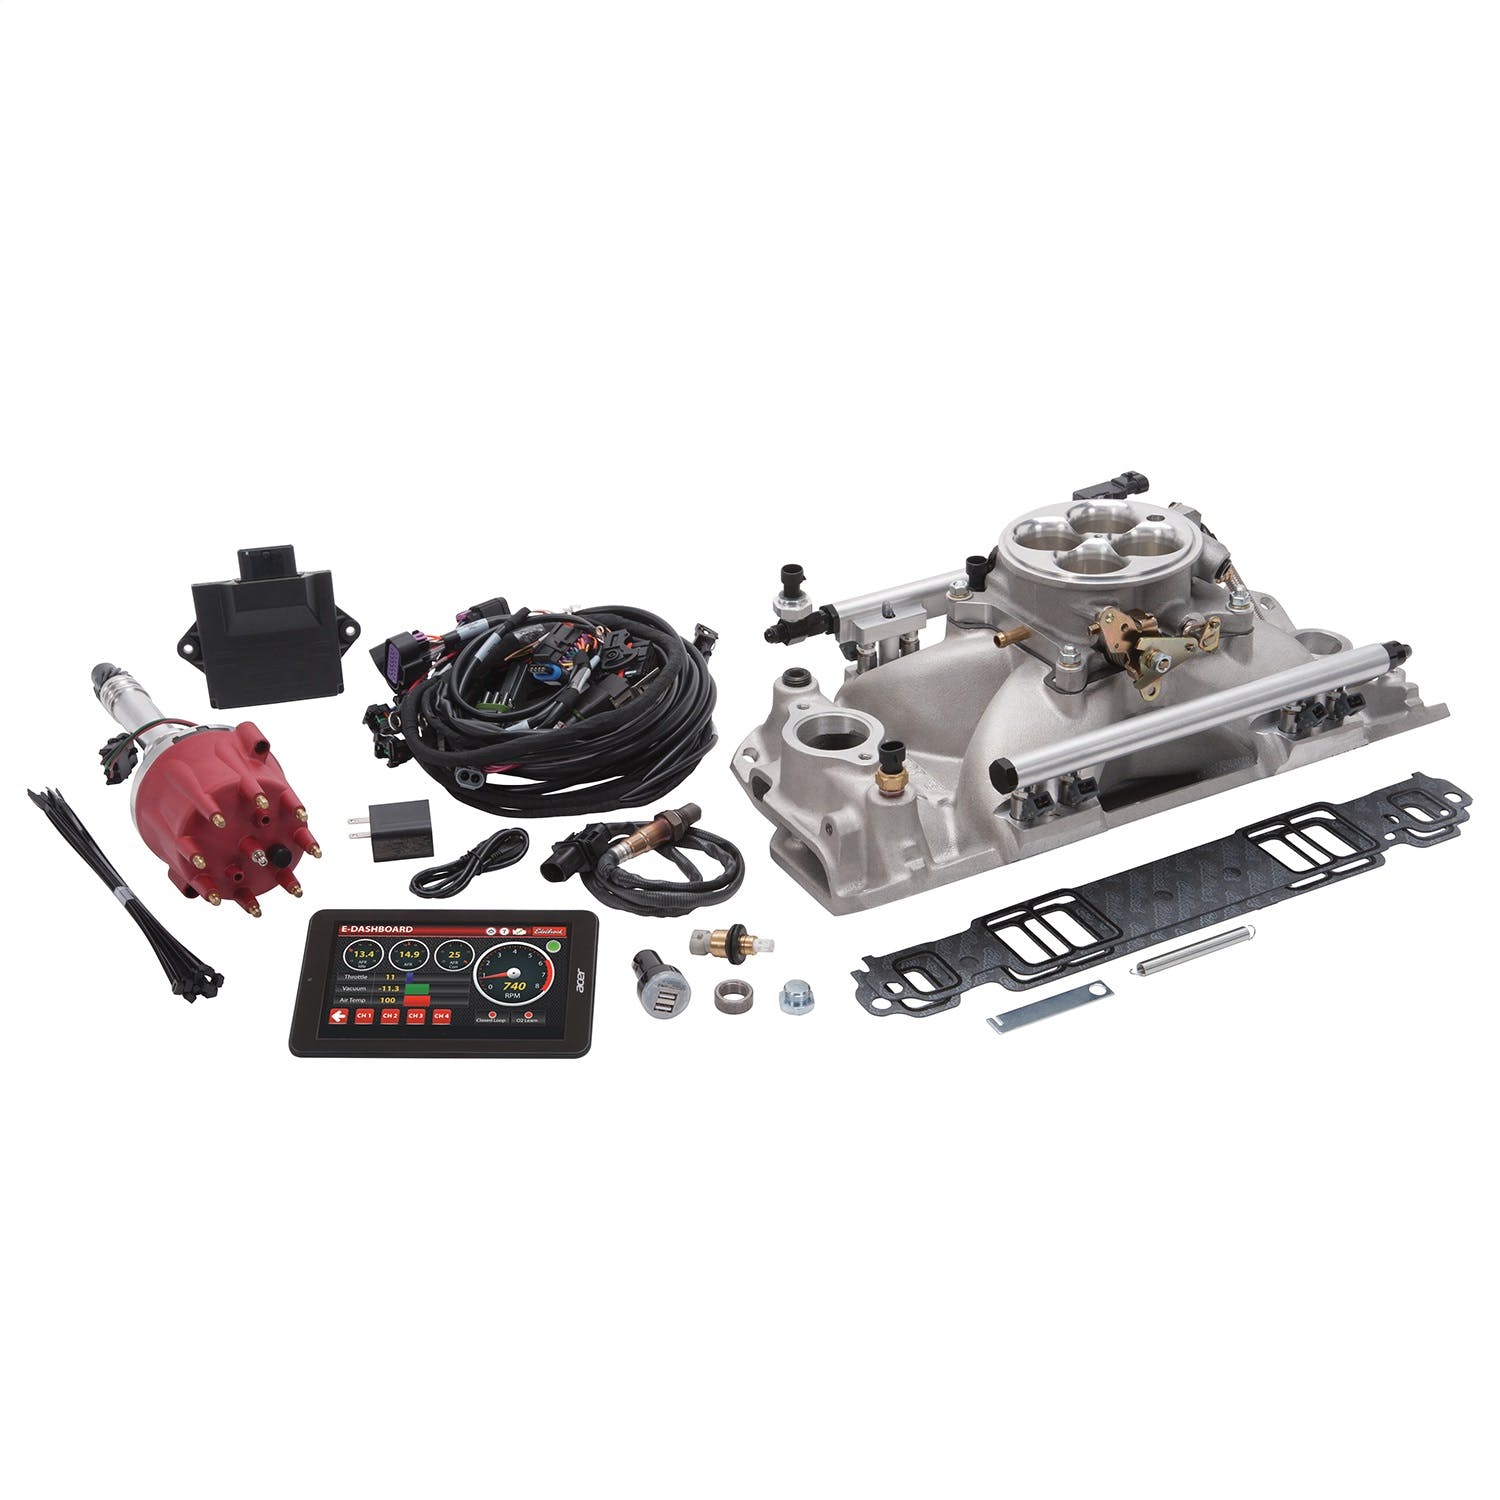 Edelbrock 35690 Pro-Flo 4 EFI System for 1986 and Earlier Small-Block Chevy Engines